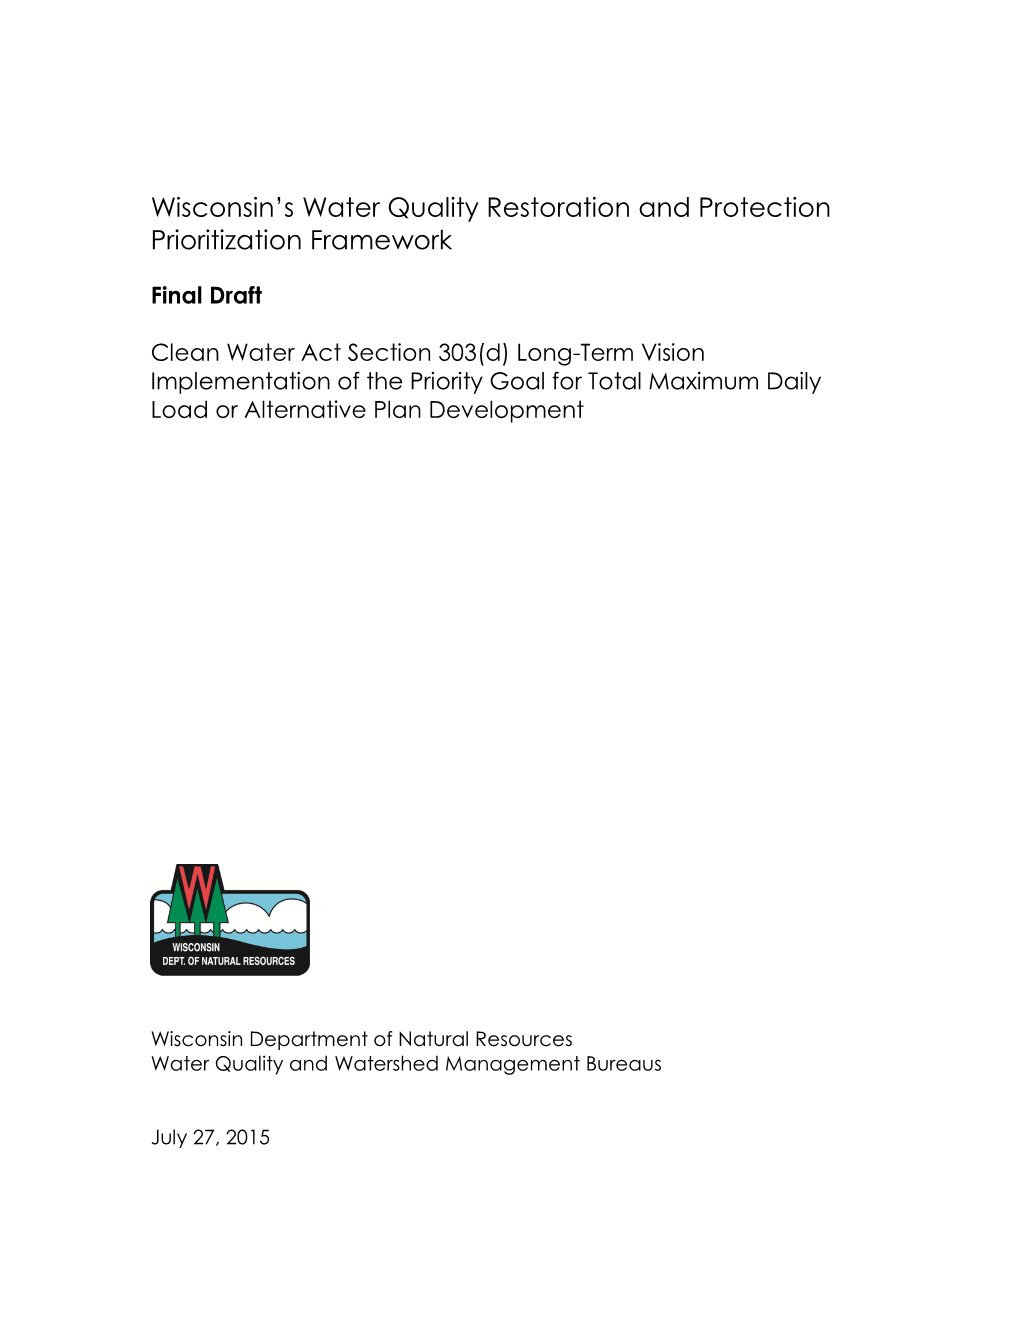 Wisconsin's Water Quality Restoration and Protection Prioritization Framework